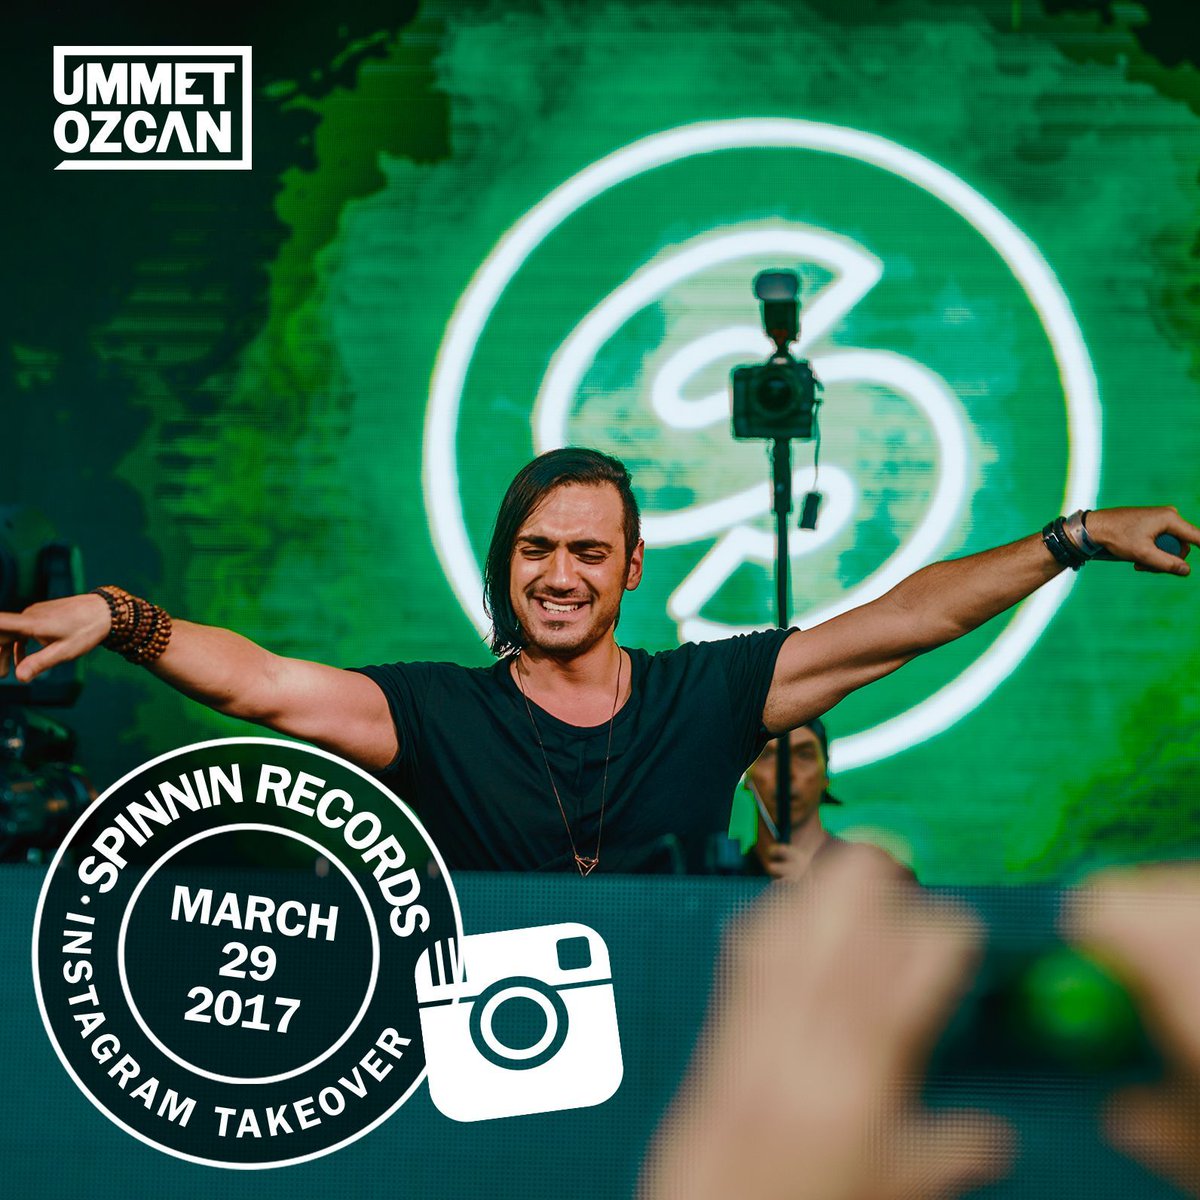 .@UmmetOzcan has just released 'Showdown' & he's now taking over our Instagram account to celebrate! https://t.co/05JWYUu7jD